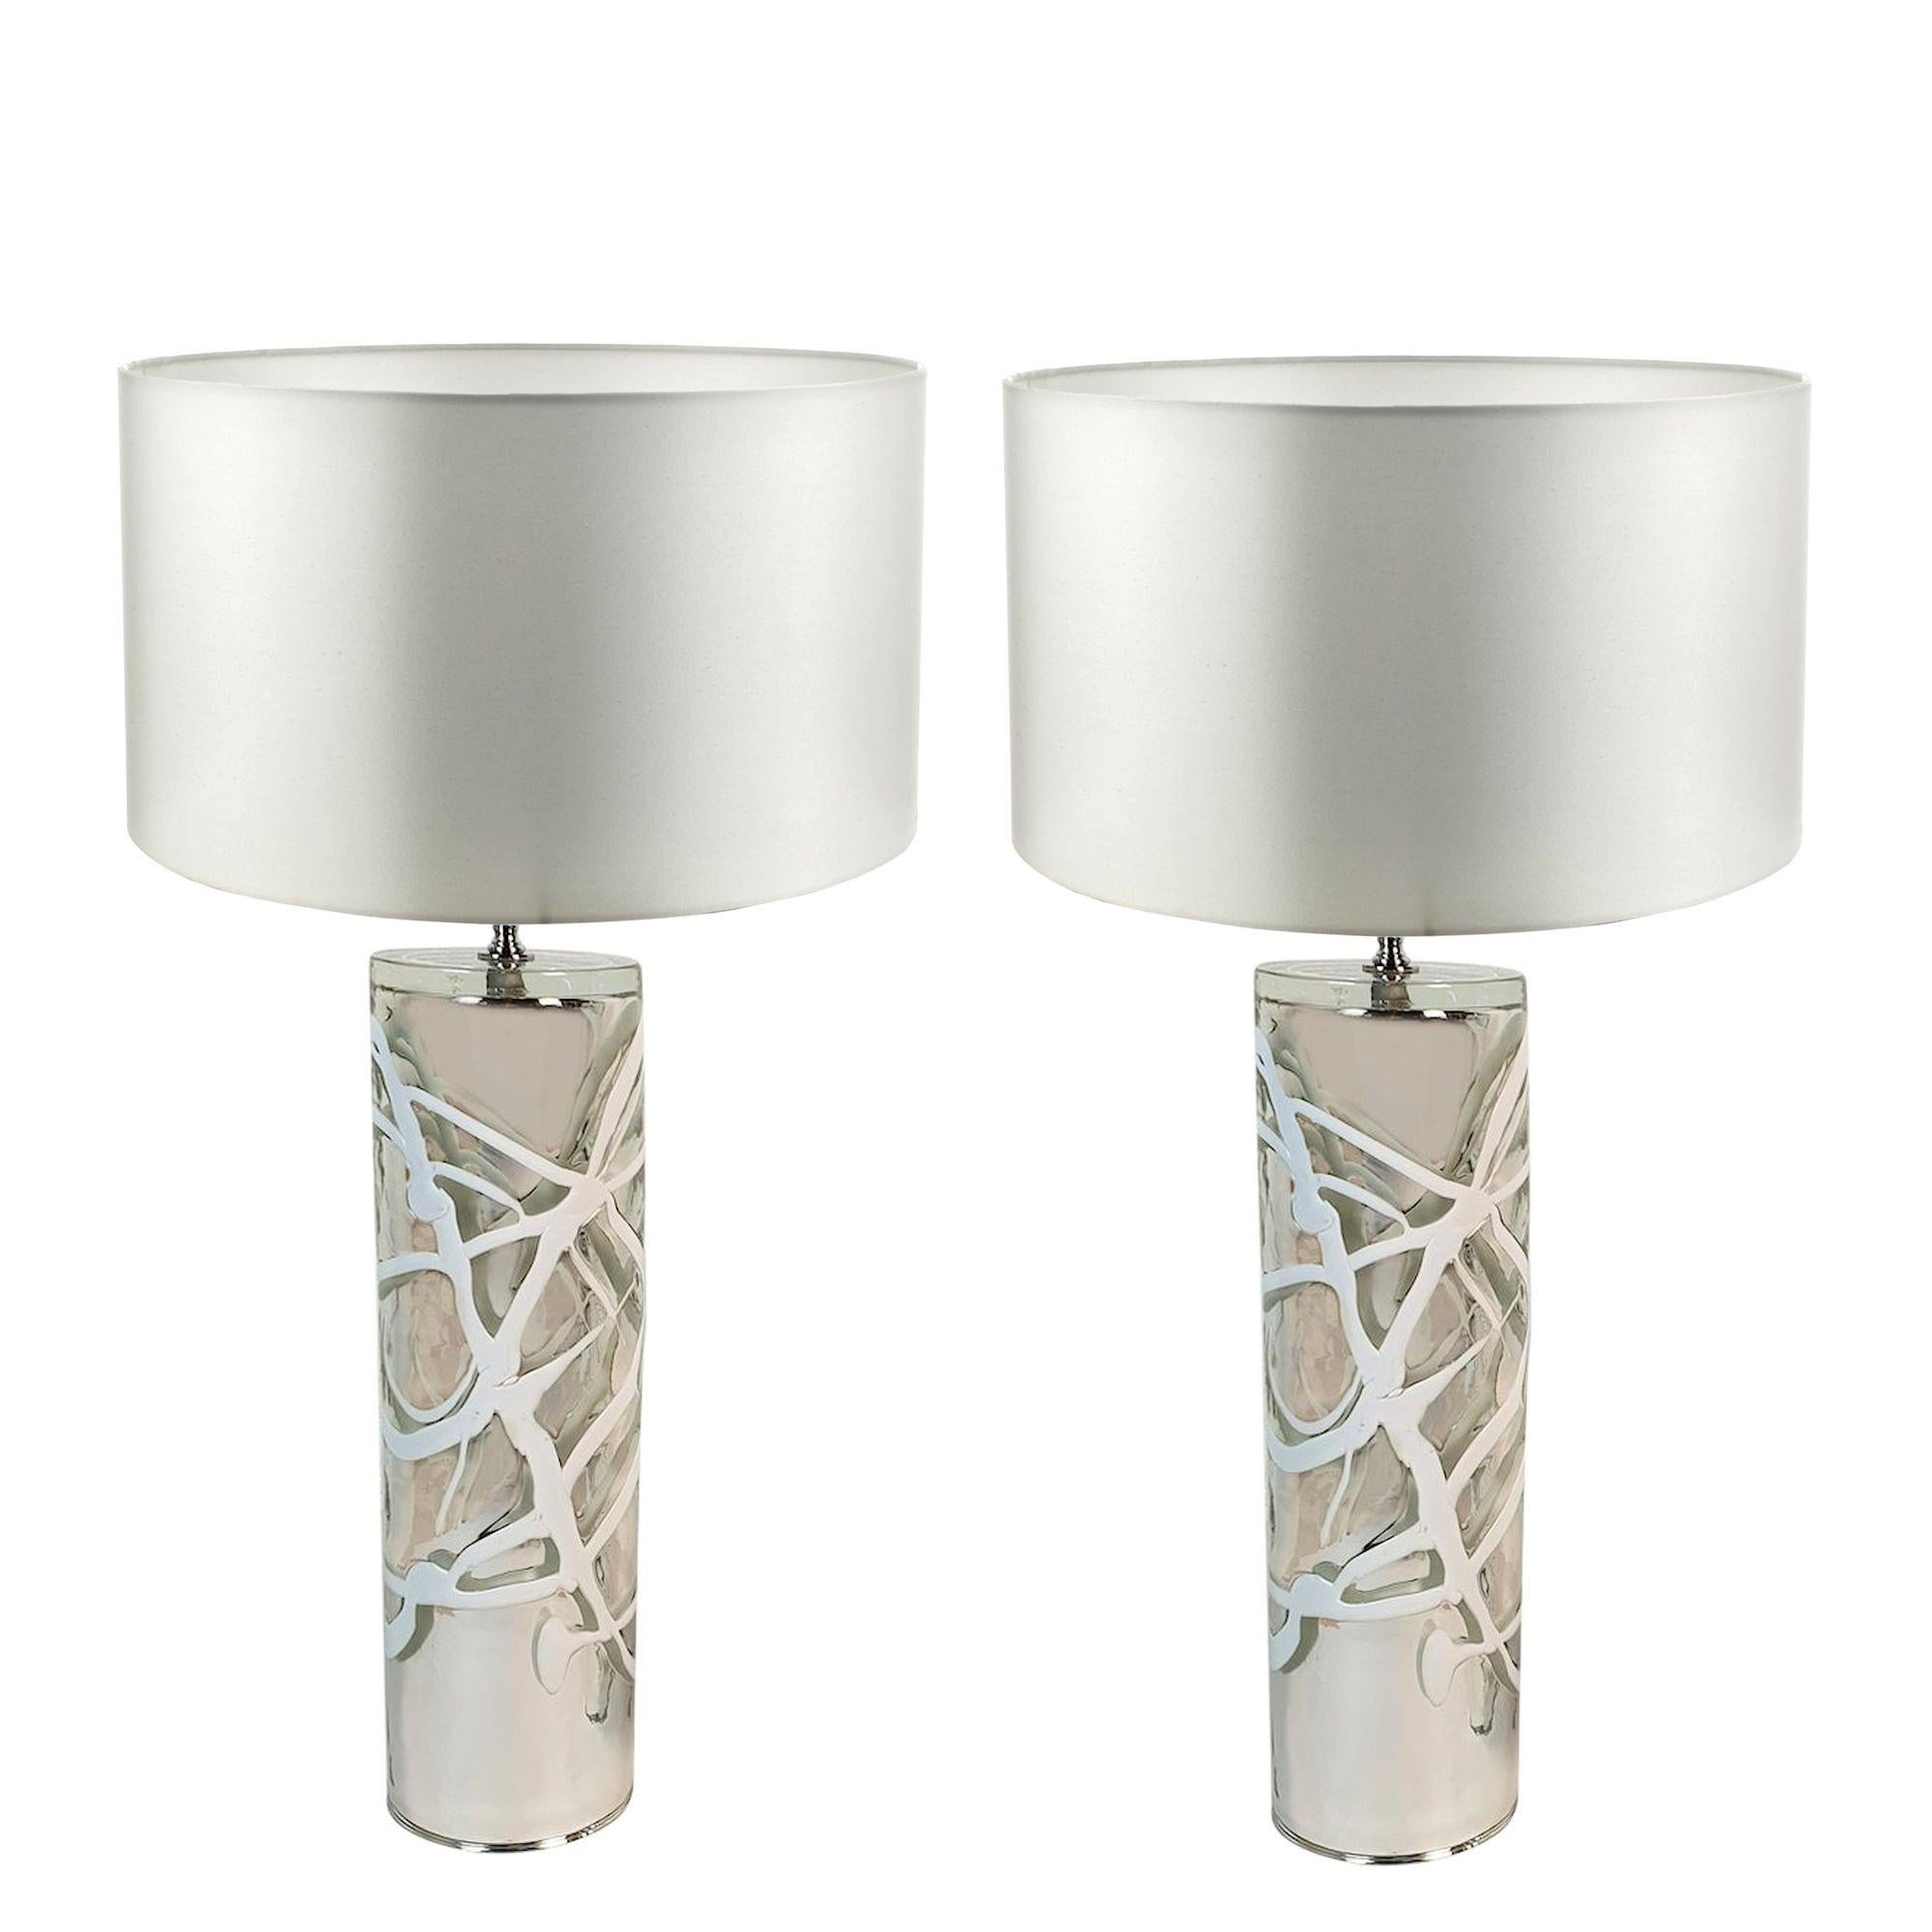 Tall pair of Mid-Century Modern Murano glass table lamps, in the manner of Venini, Italy 1970s.
The pair of table lamps have a cylindrical shape and are made of a heavy plain Murano glass.
The glass is silver and mirrored, with white handmade lines